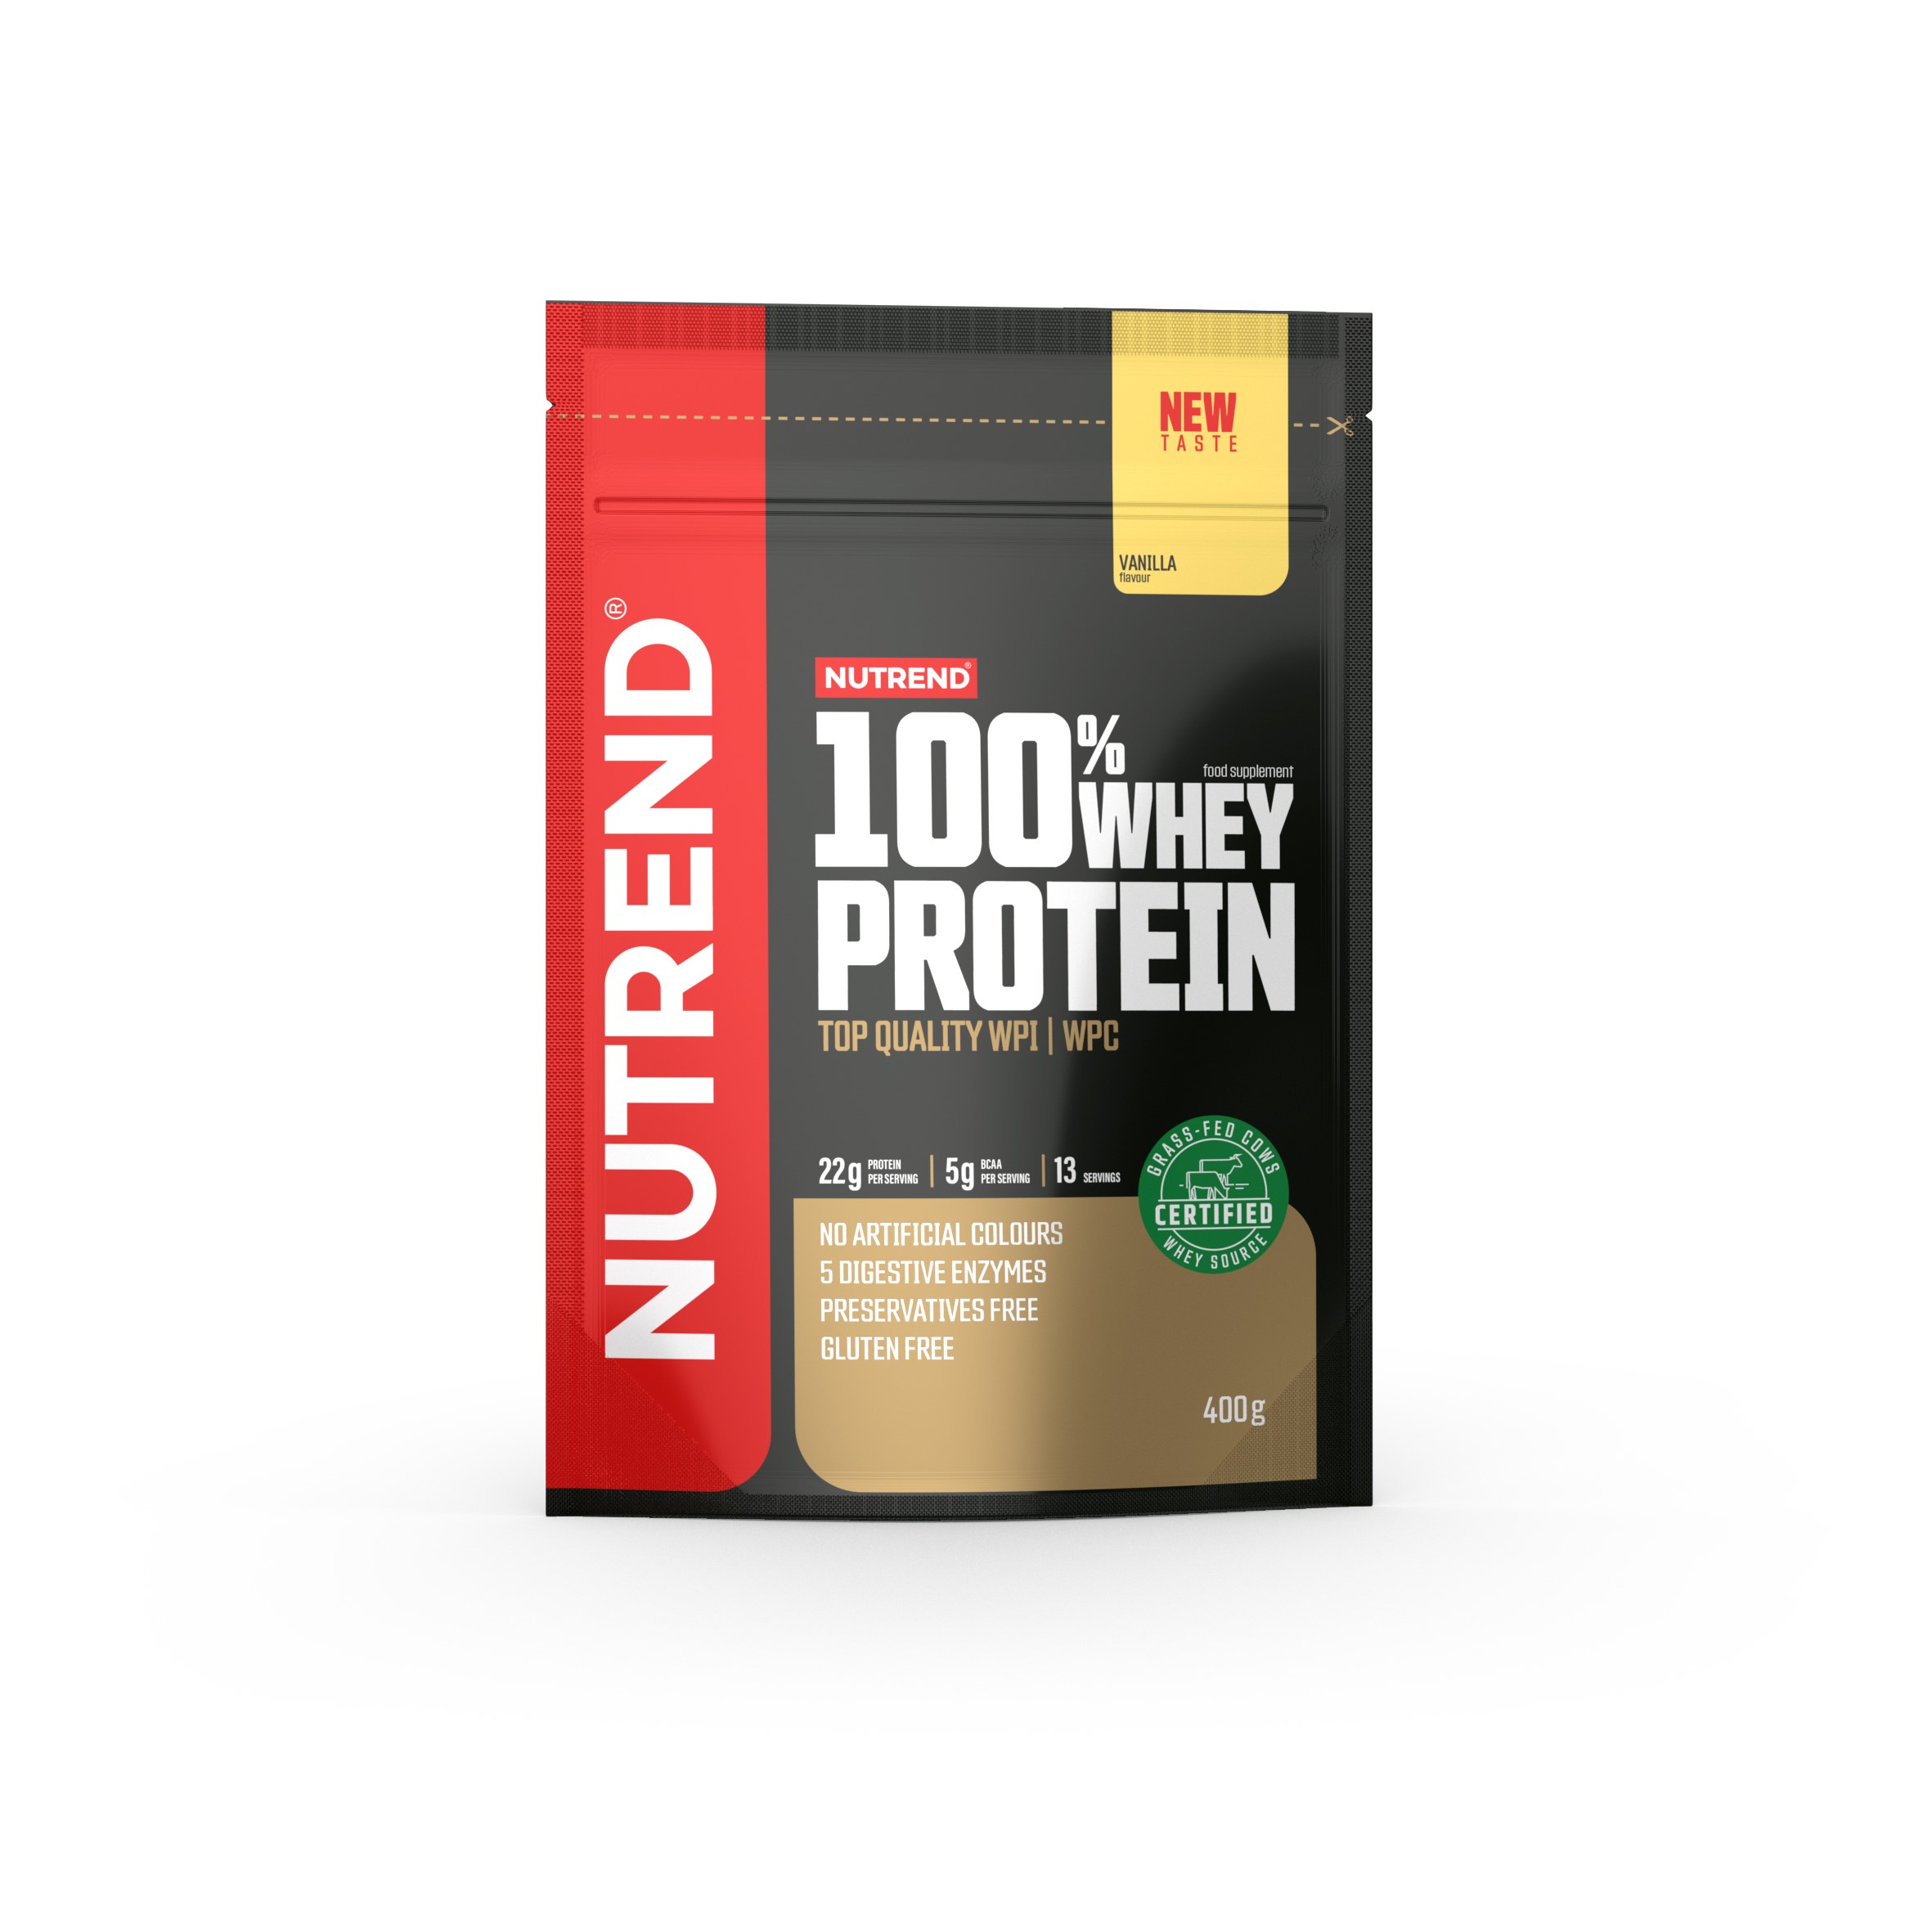 Concentrate Proteice - Nutrend 100% WHEY PROTEIN 400g Cookies Cream, advancednutrition.ro